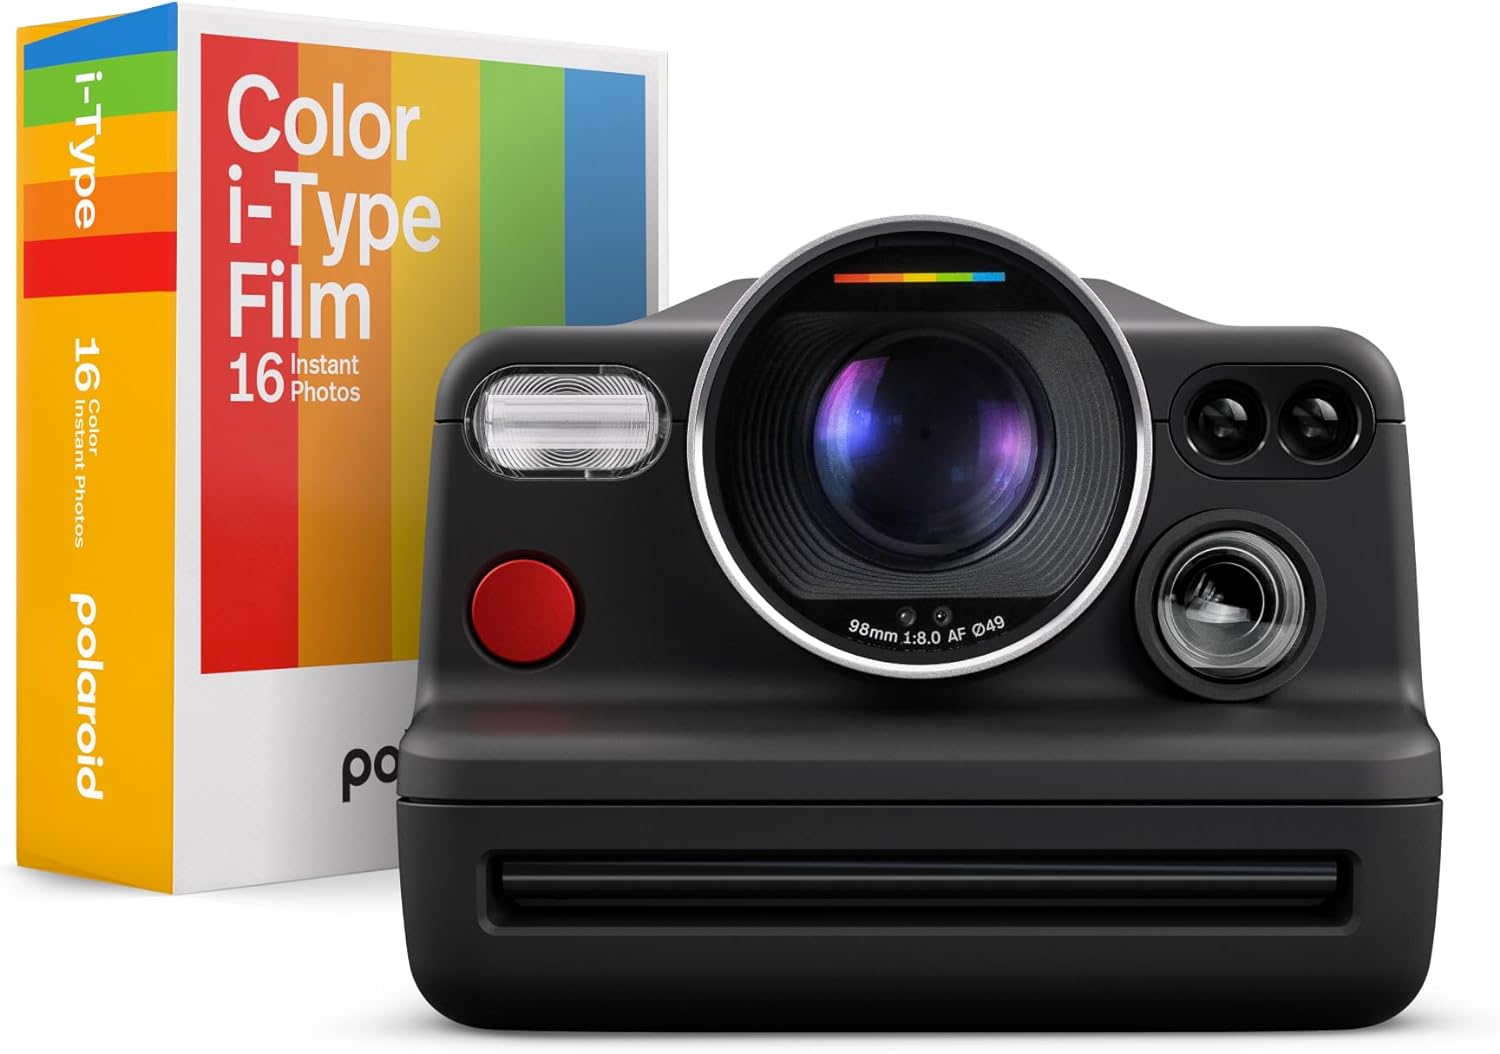 Polaroid I-2 Instant Camera Bundle with Color i-Type Film Double Pack